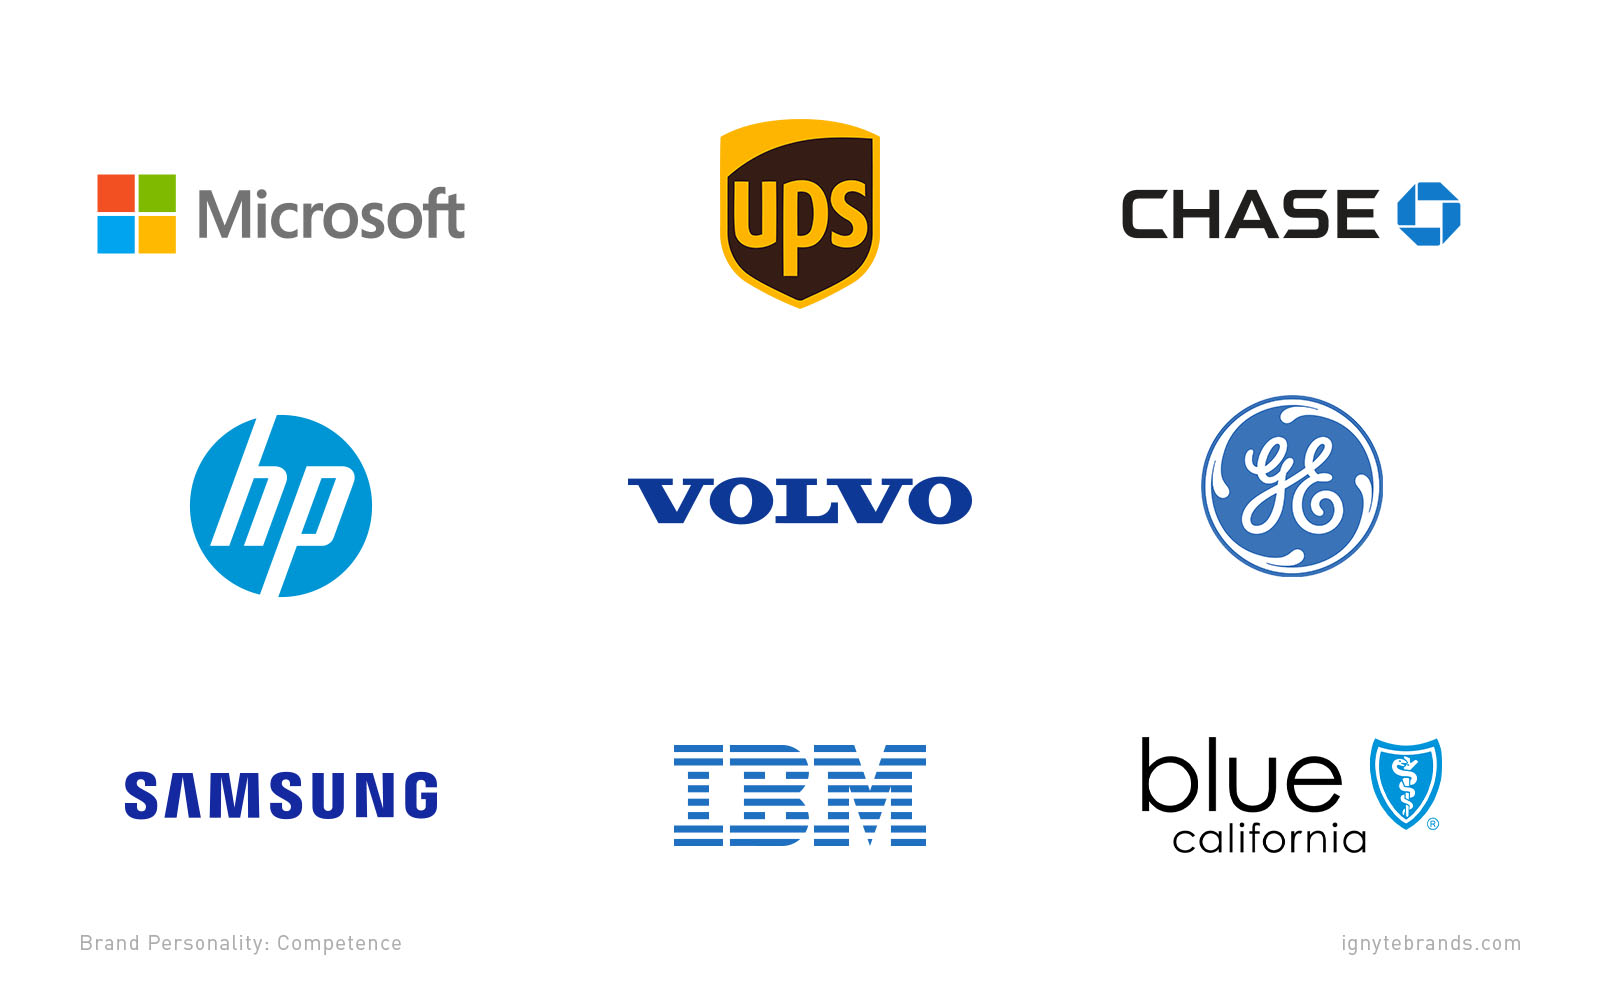 9 examples of brands with competent brand personalities, including Microsoft, UPS, Chase, HP, Volvo, GE, Samsung, IBM, and Blue Shield